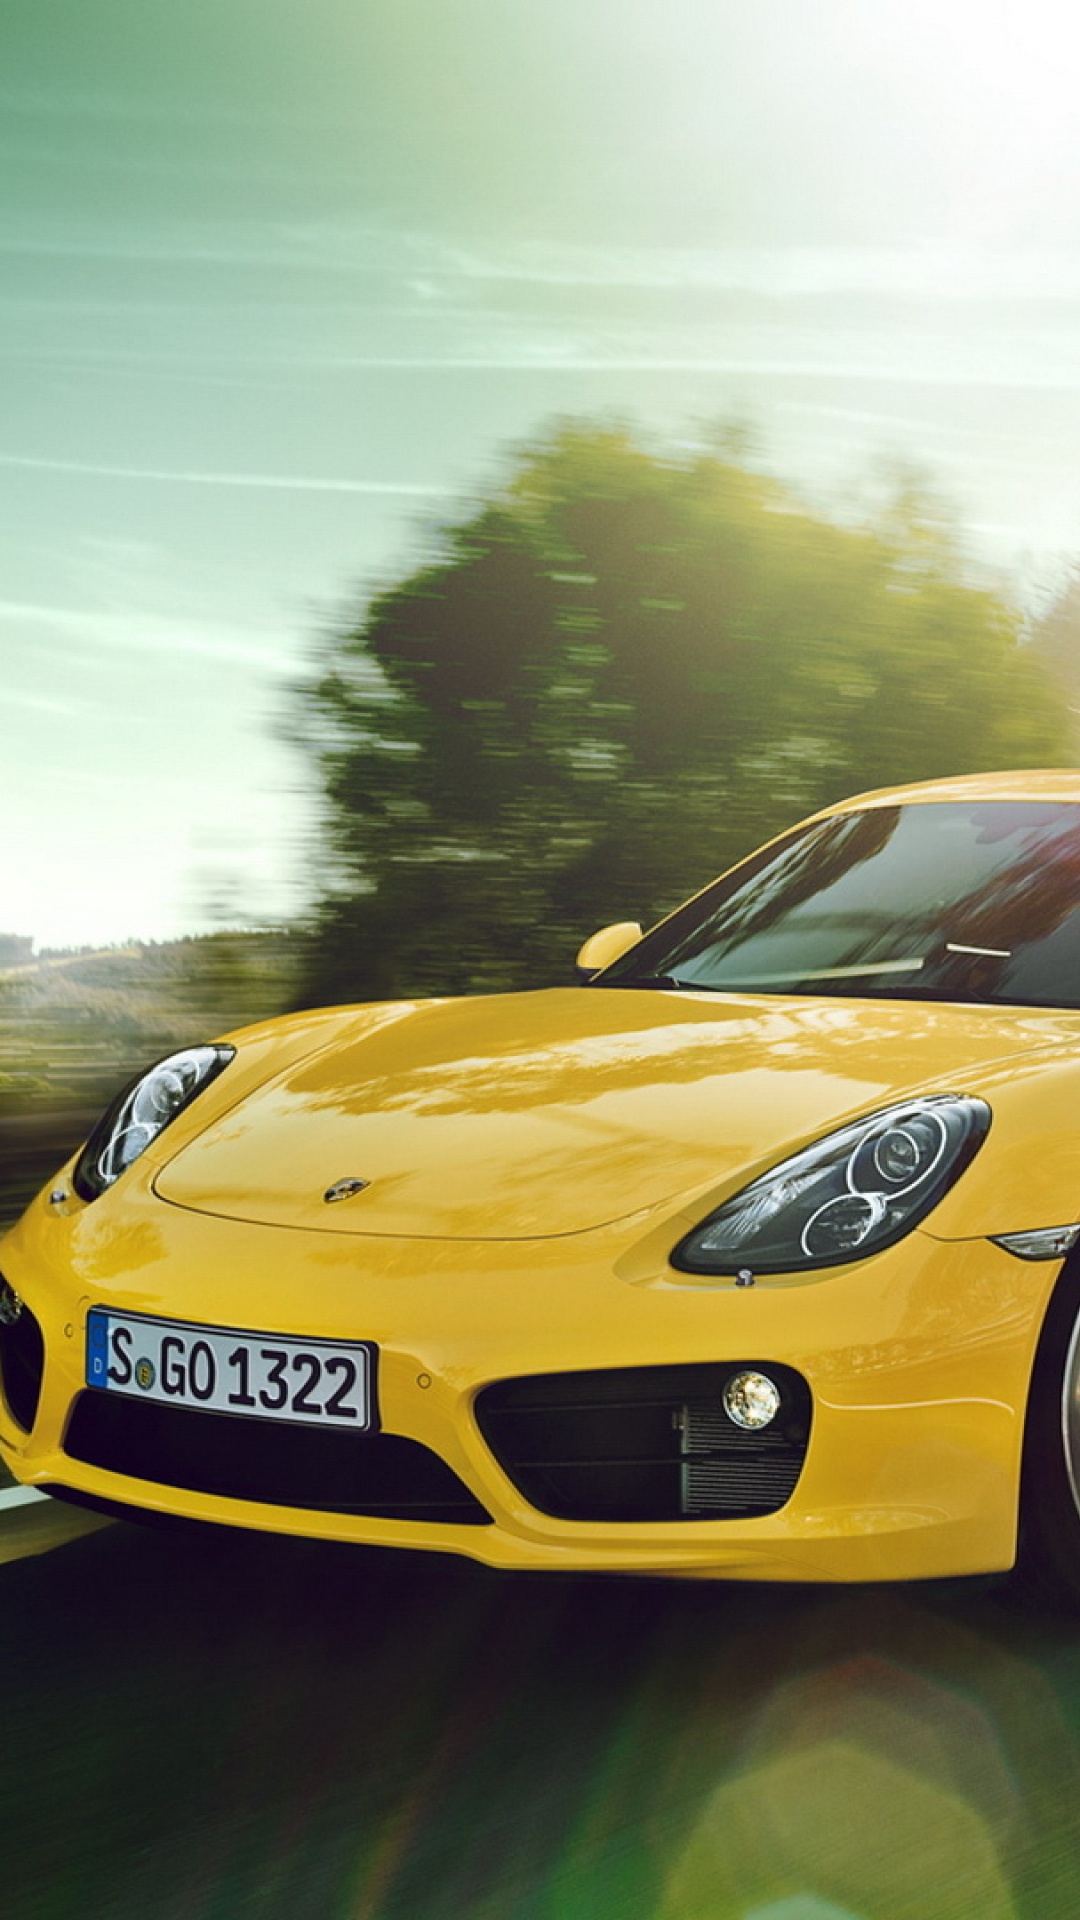 Yellow Porsche 911 on Road During Daytime. Wallpaper in 1080x1920 Resolution